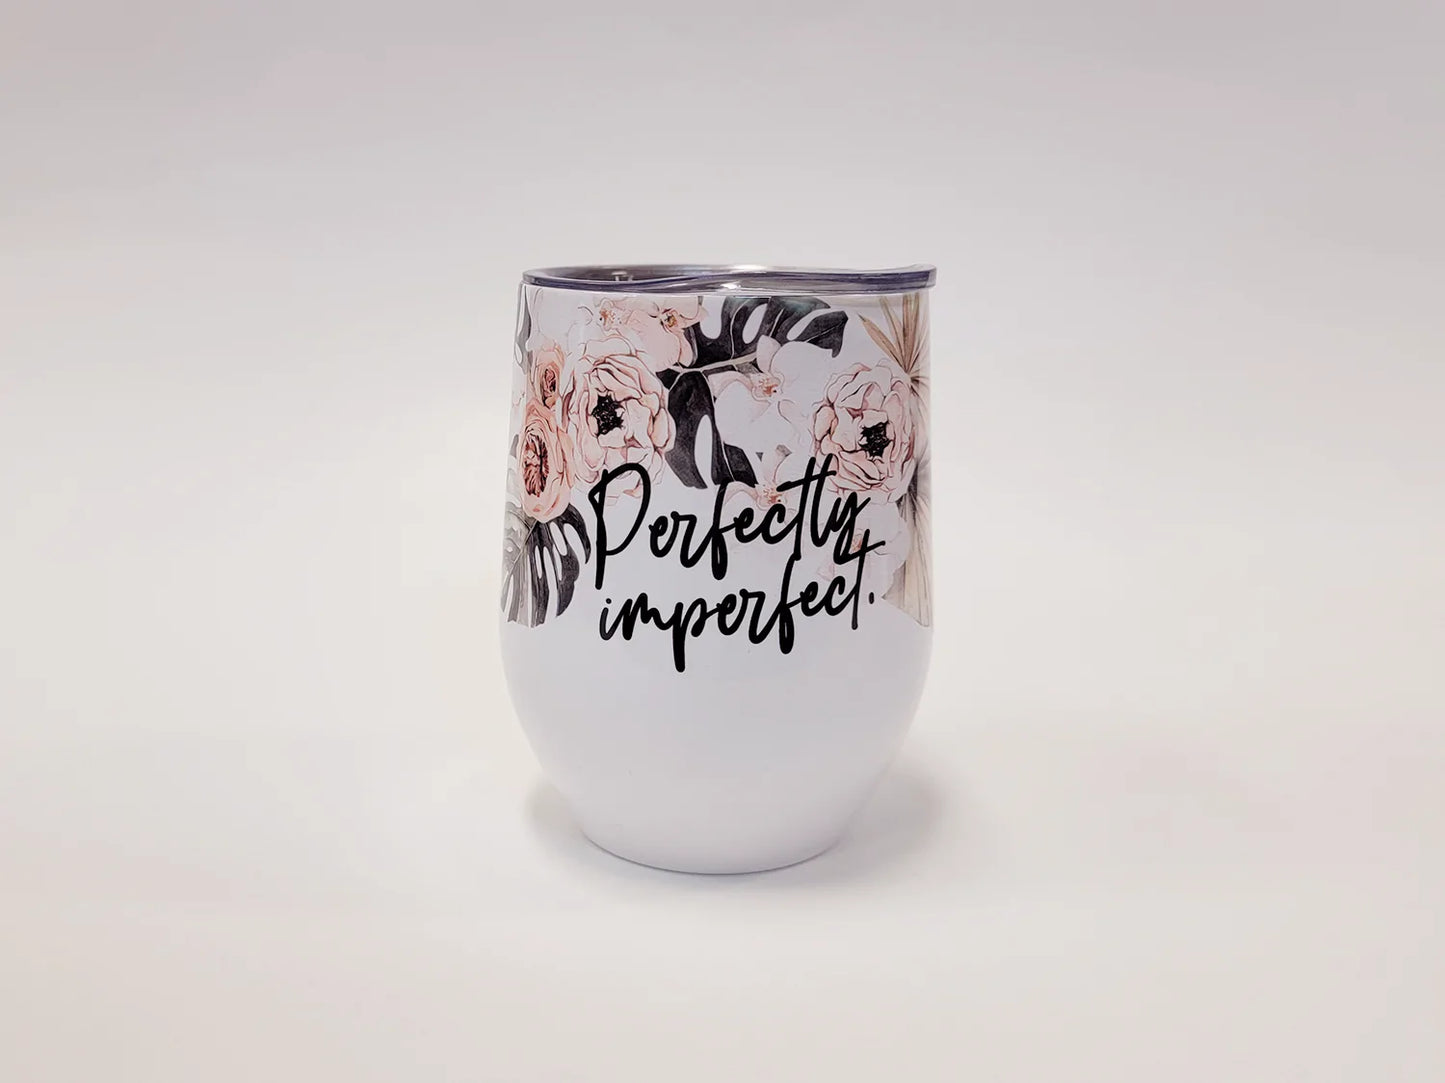 DWG200 “Perfectly imperfect” Wine tumbler